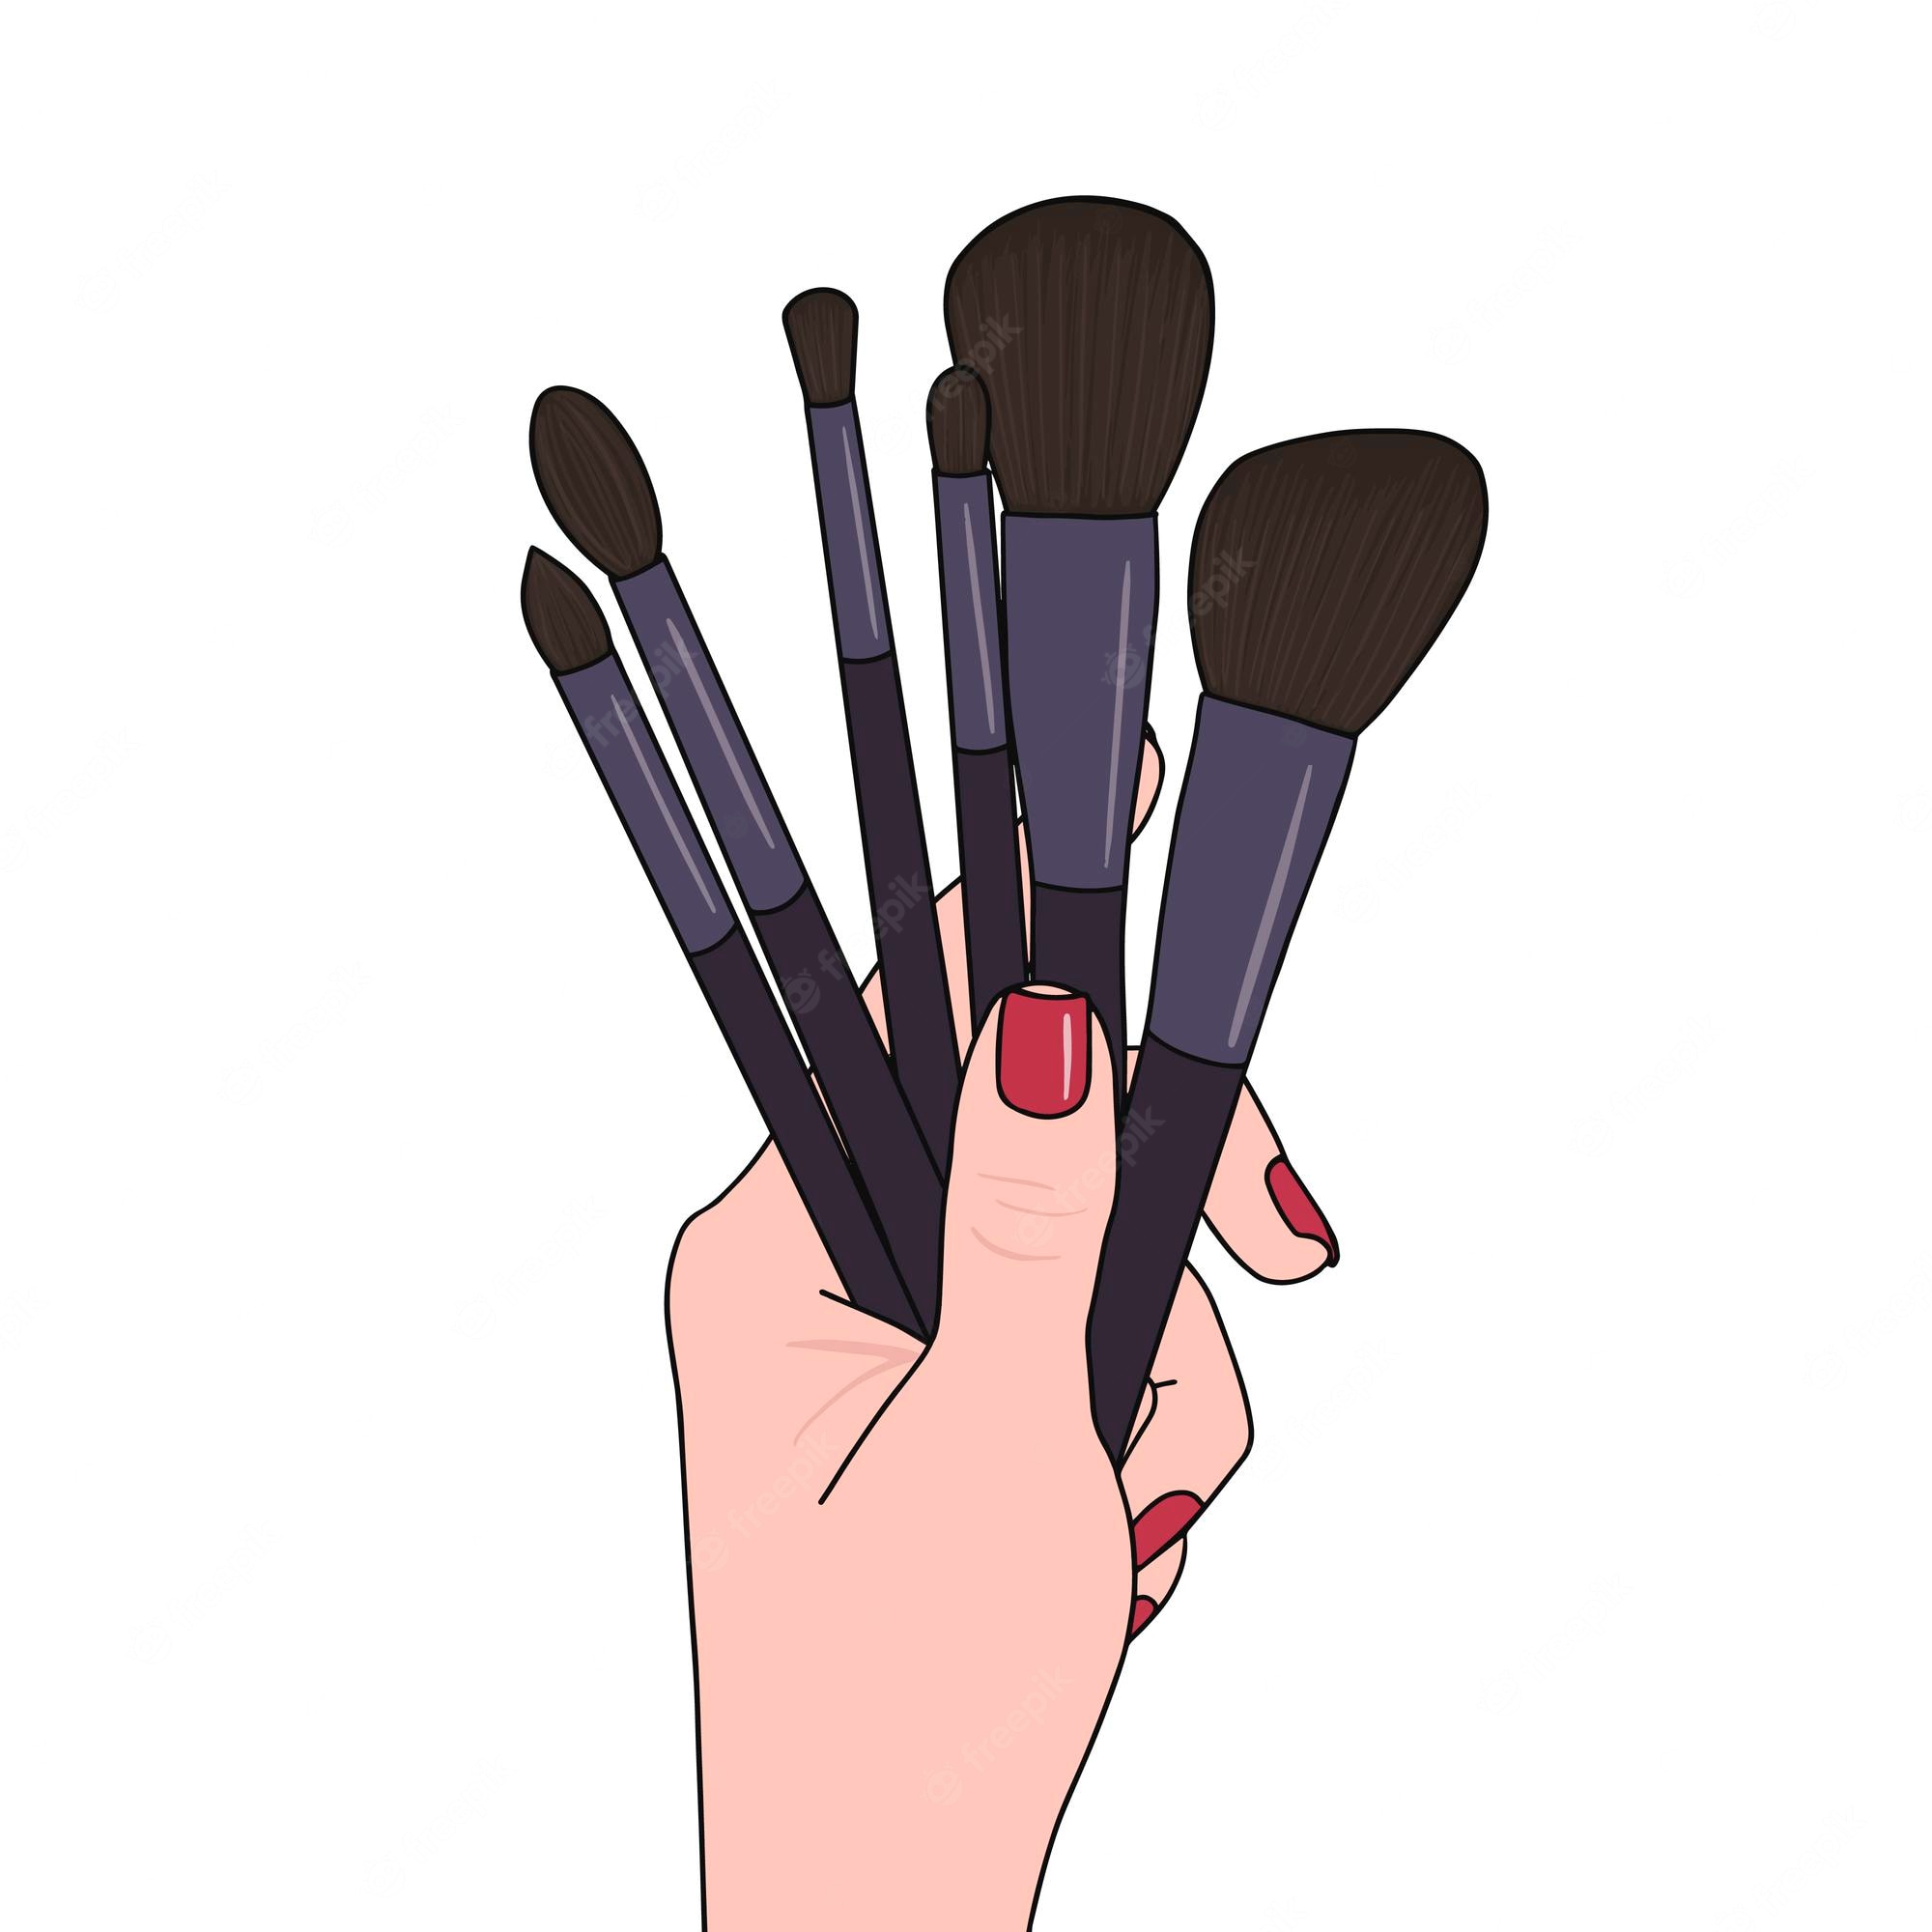 Premium Vector. Makeup brushes in hand on white background. illustration for printing, background, wallpaper, covers, packaging, greeting cards, posters, stickers, textile and seasonal design